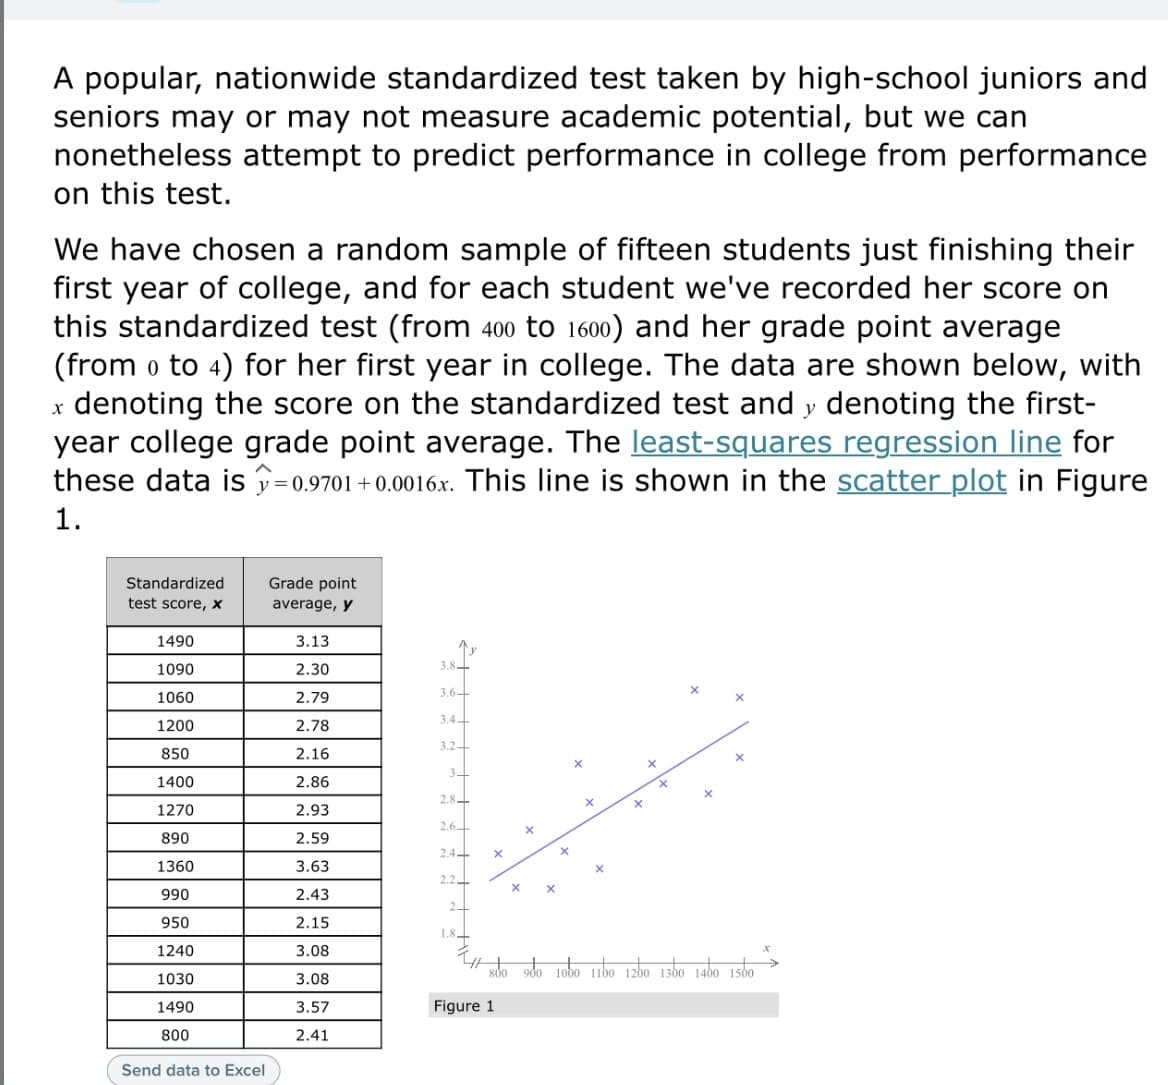 A popular, nationwide standardized test taken by high-school juniors and
seniors may or may not measure academic potential, but we can
nonetheless attempt to predict performance in college from performance
on this test.
We have chosen a random sample of fifteen students just finishing their
first year of college, and for each student we've recorded her score on
this standardized test (from 400 to 1600) and her grade point average
(from o to 4) for her first year in college. The data are shown below, with
x denoting the score on the standardized test and y denoting the first-
year college grade point average. The least-squares regression line for
these data is y=0.9701+0.0016x. This line is shown in the scatter plot in Figure
1.
Standardized
Grade point
test score, x
average, y
1490
3.13
2.30
3.8L"
1090
3,6+
1060
2.79
3.4
1200
2.78
3.2
850
2.16
1400
2.86
2.8
1270
2.93
2.6
890
2.59
2.4
1360
3.63
2.2
990
2.43
2-
950
2.15
1.8
1240
3.08
sdo odo 1obo 1bo 12bo 1360 1400 1560
1030
3.08
1490
3.57
Figure 1
800
2.41
Send data to Excel
